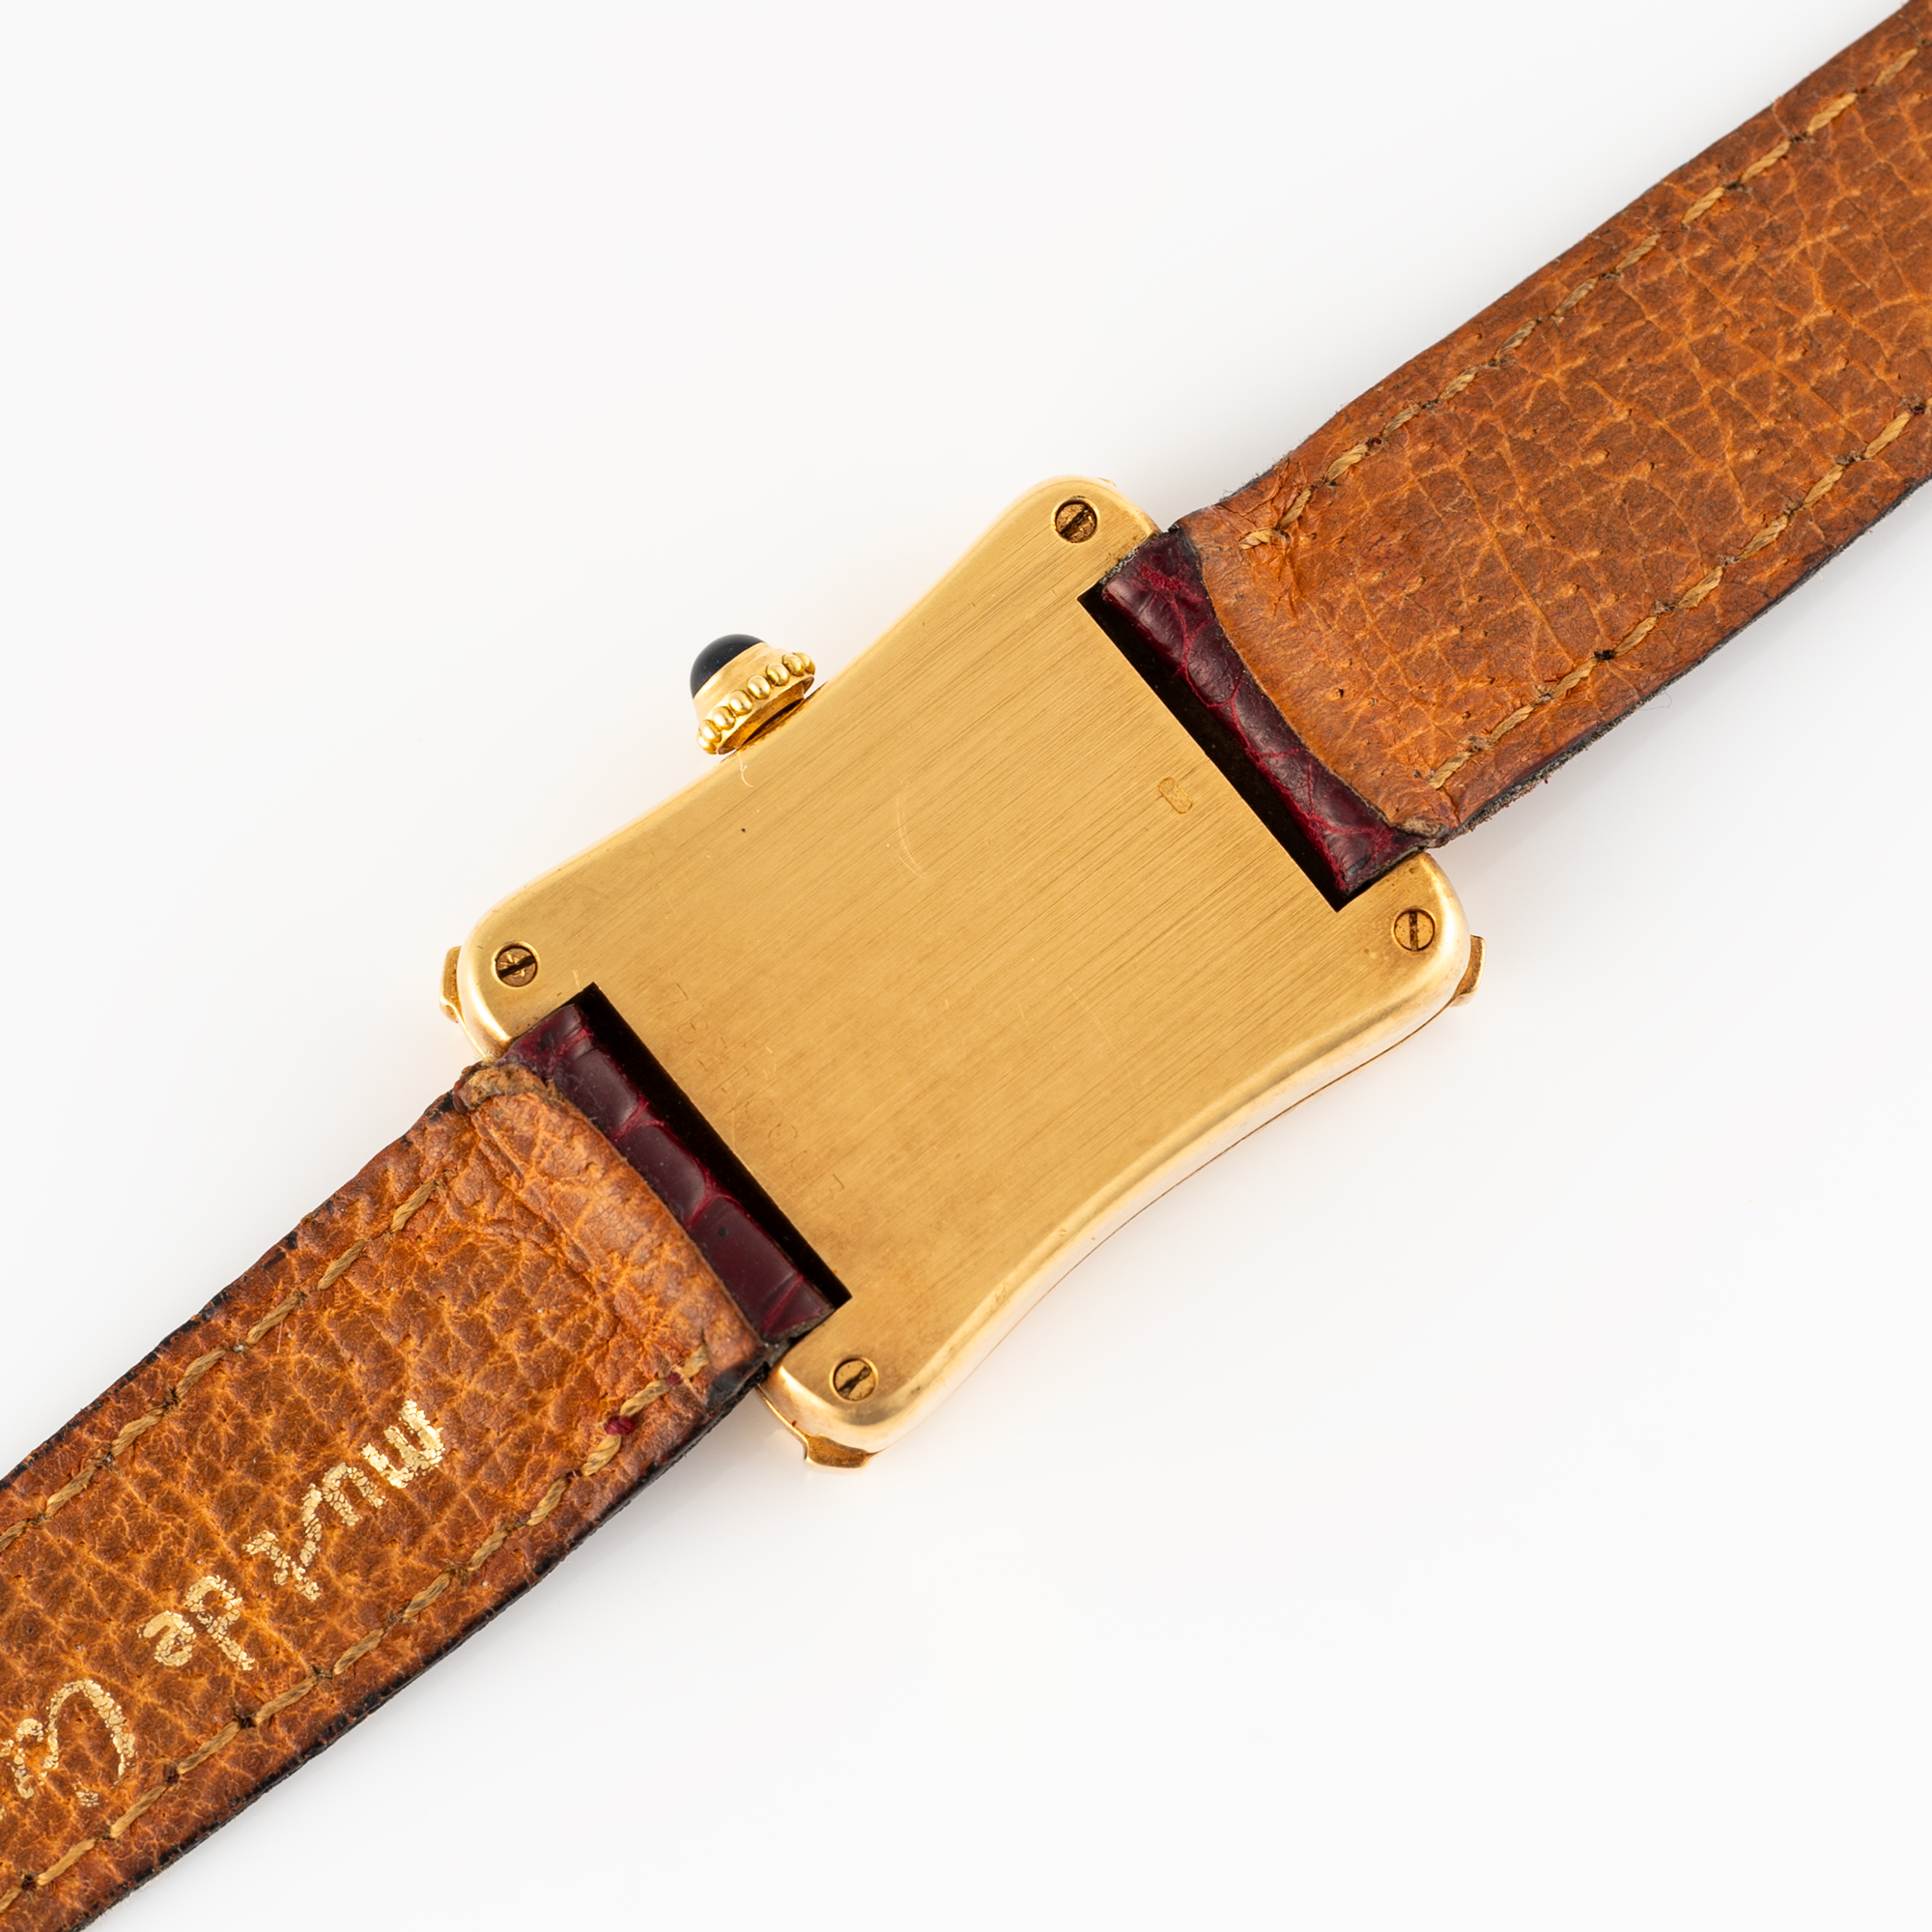 A VERY RARE LADY'S 18K SOLID GOLD CARTIER PARIS BAMBOO COUSSIN WRIST WATCH CIRCA 1970s, REF. 78110 - Image 7 of 10